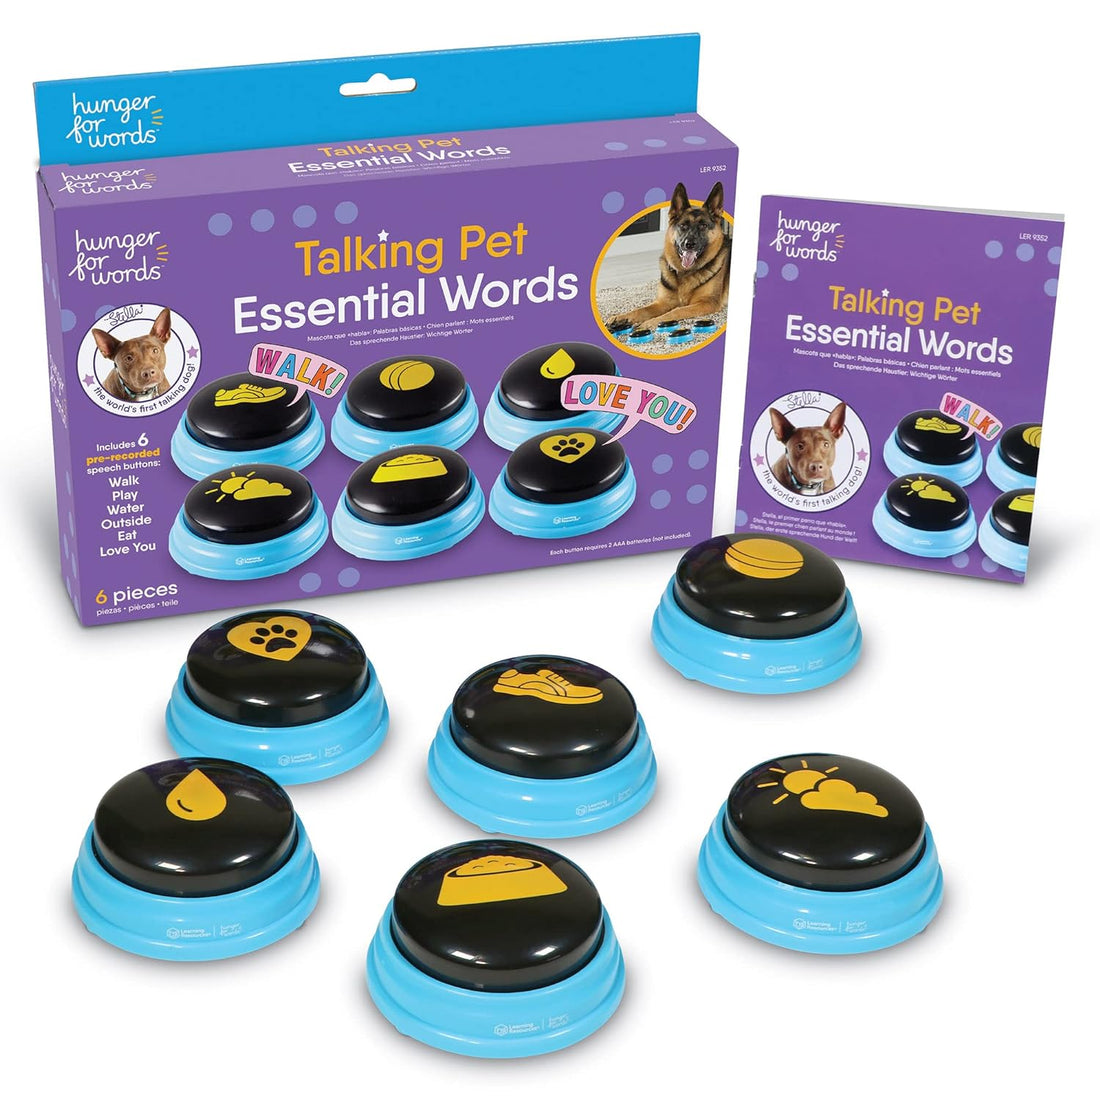 Hunger For Words Talking Pet Essential Words - 6 Piece Set Pre-Recorded Speech Buttons for Dogs, Talking Dog Buttons, Perfect for Dog Training and Obedience Games